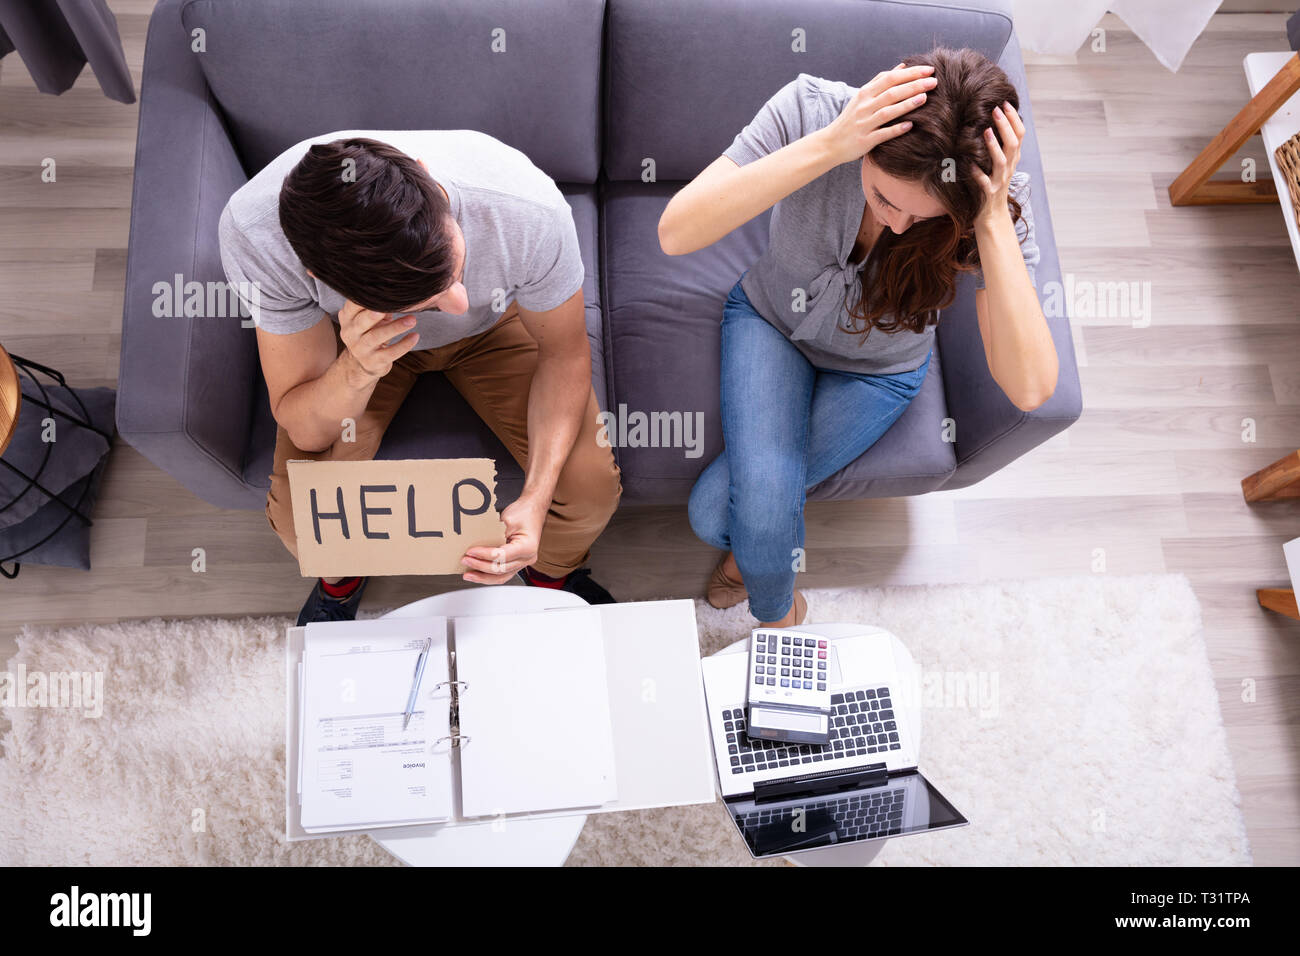 Young Couple Sitting On Sofa Holding Help Sign While Calculating Invoice Stock Photo